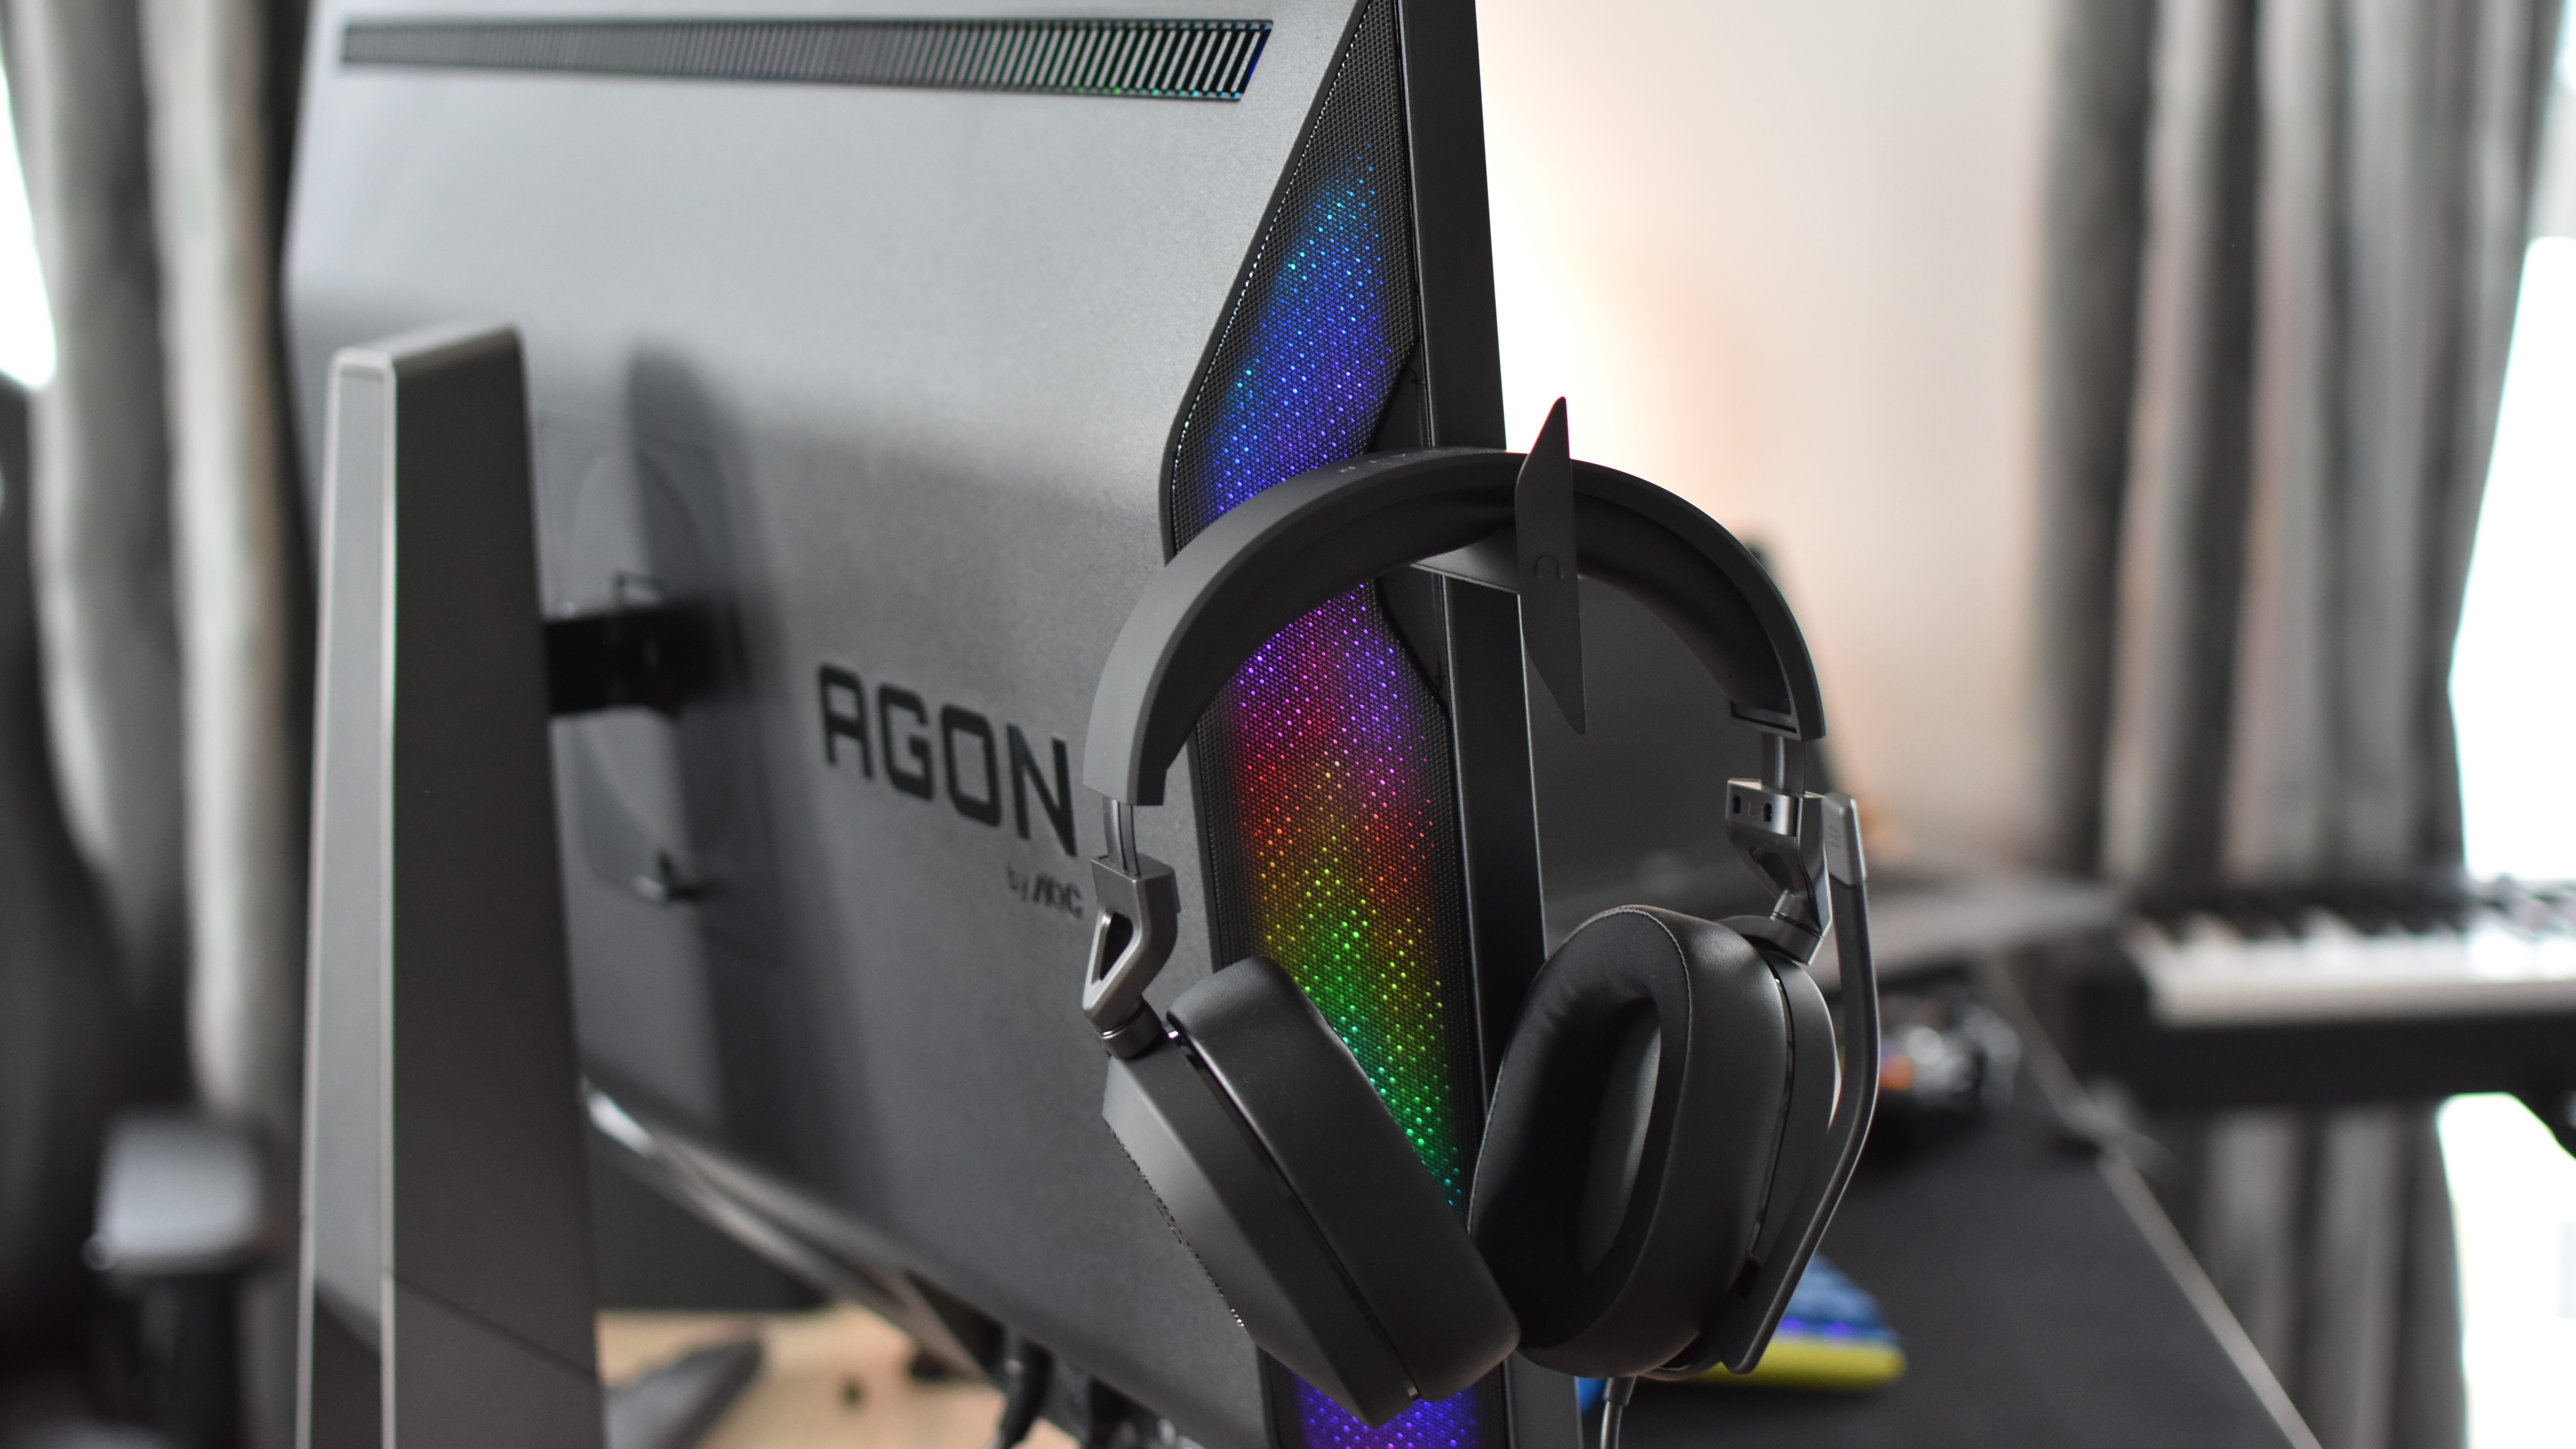 A headset resting on one of the Porsche Design AOC Agon Pro PD32M monitor's pop-out hooks.